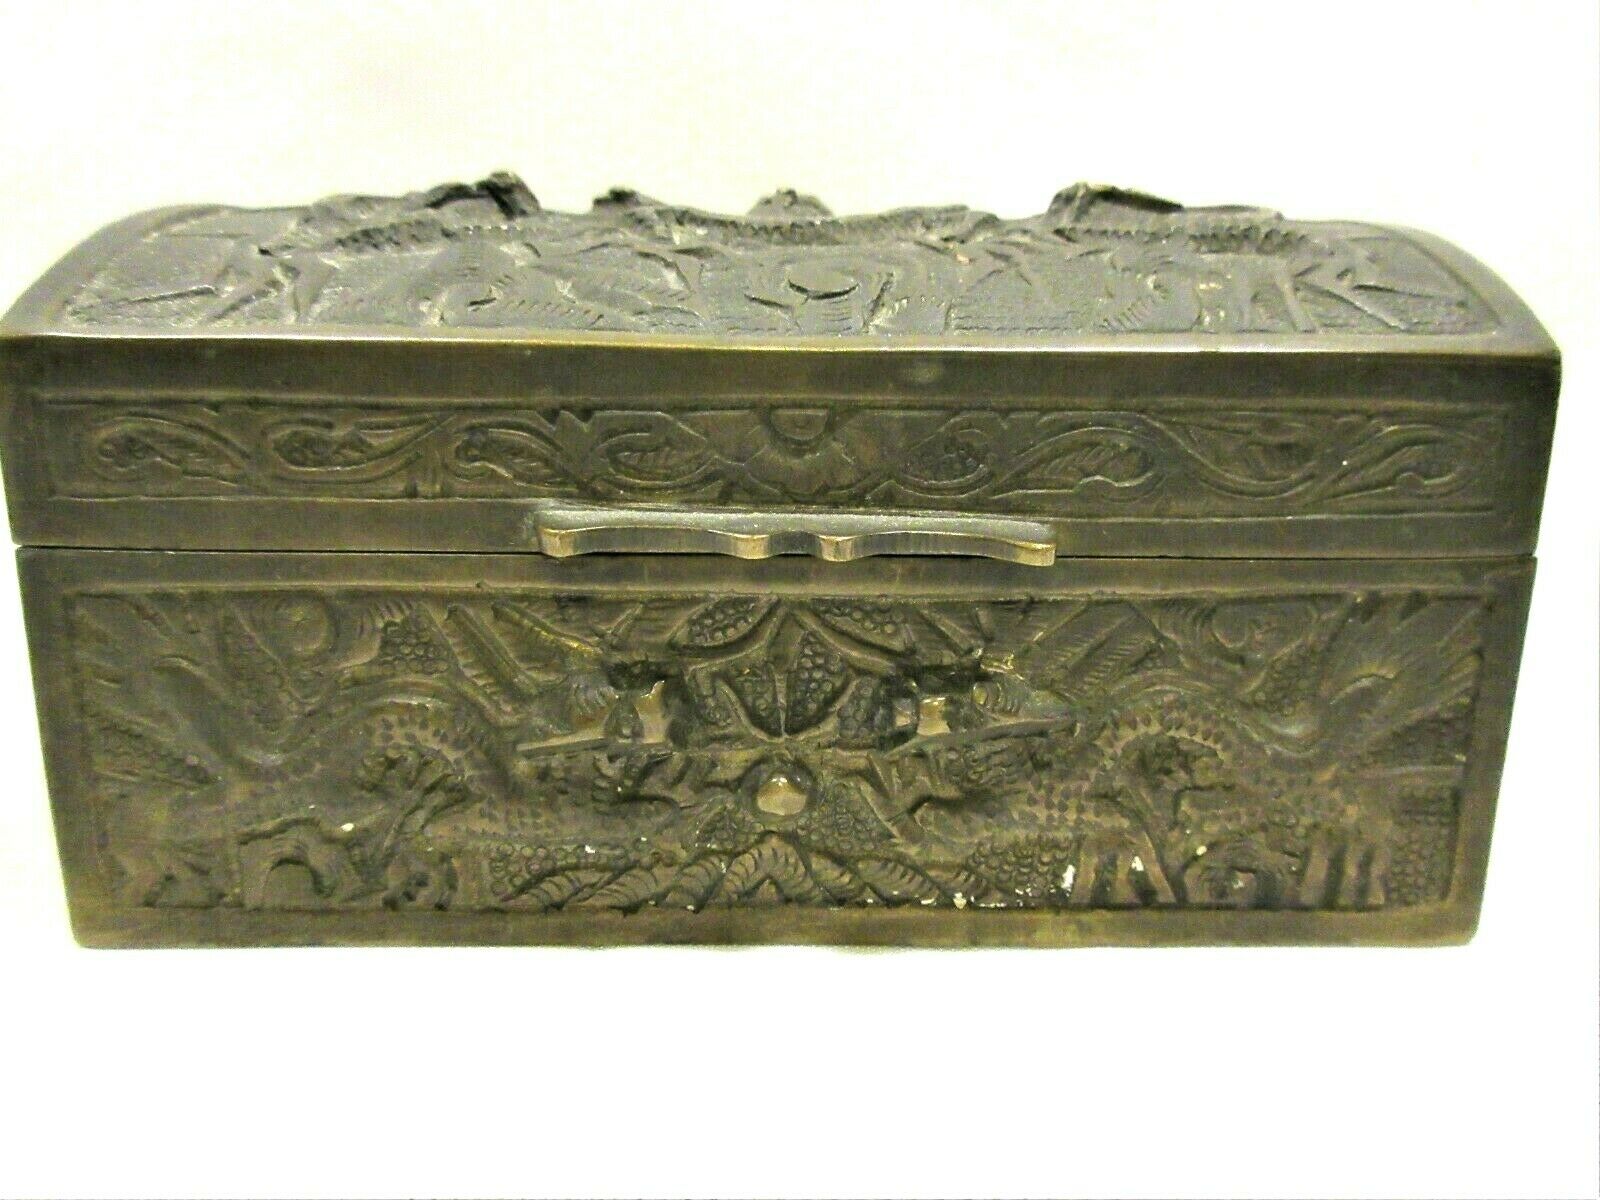 Antique Chinese Metal Brass/bronze Carved Small Hinged Box Cigarette/jewelry Box